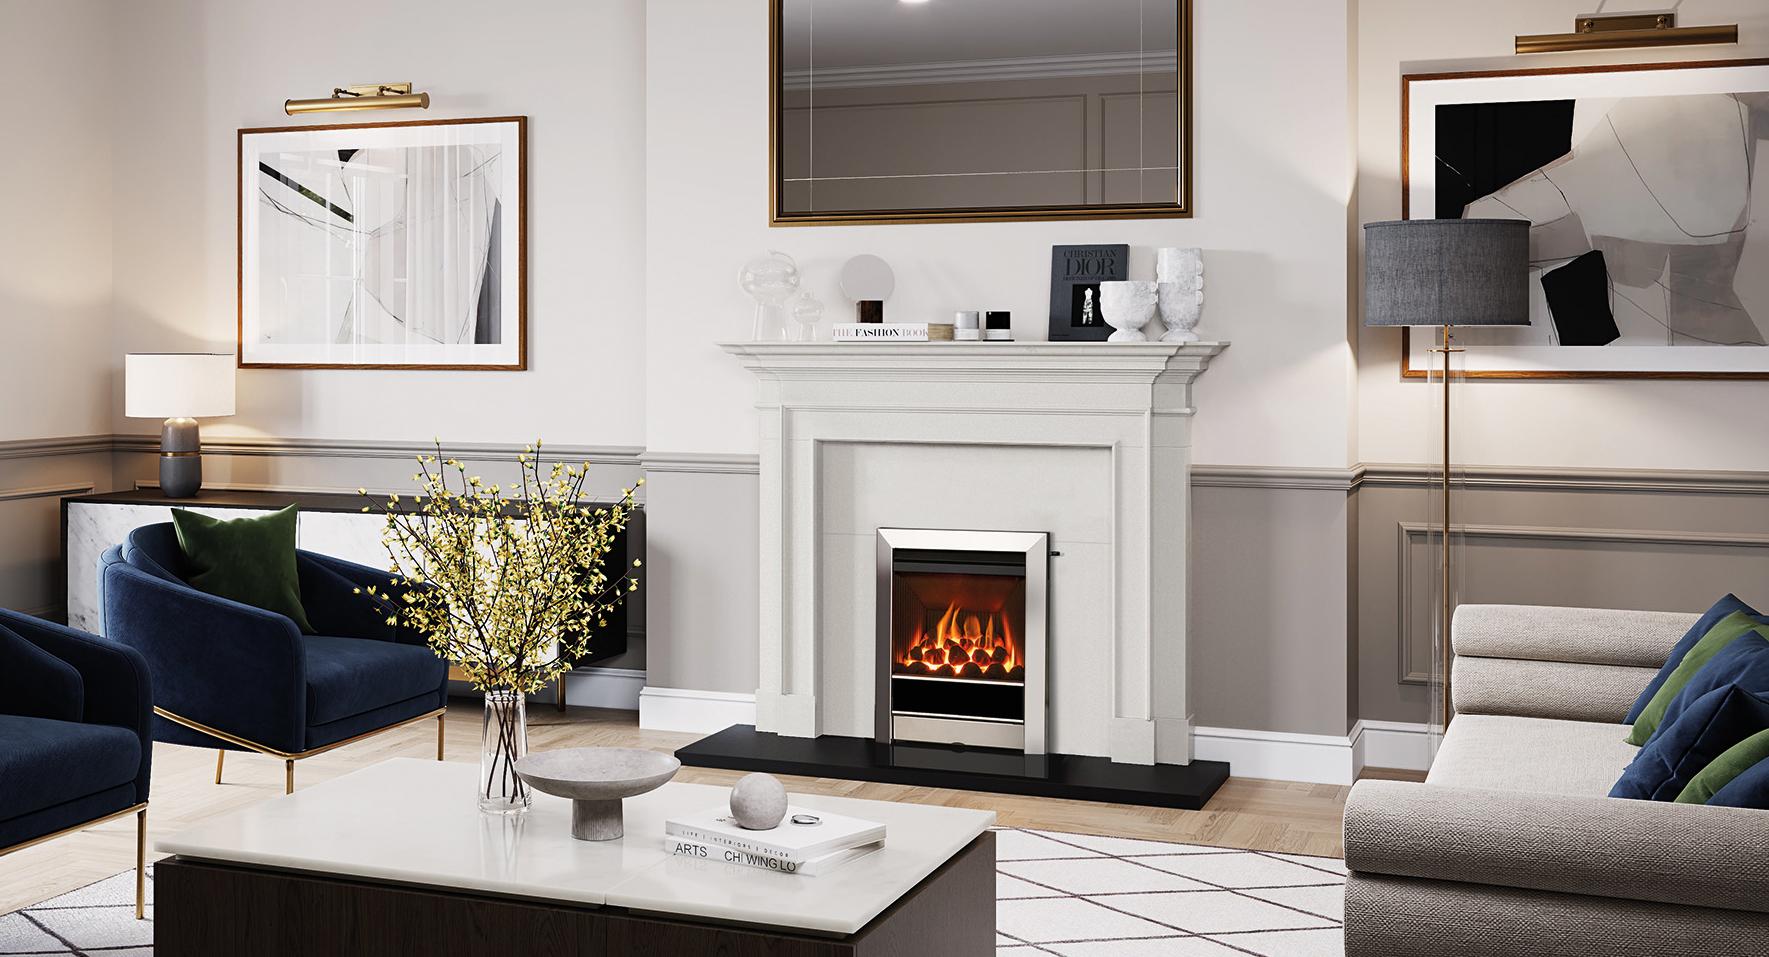 Gazco Logic HE gas fire with Tempo Complete front in Polished Stainless finish. Installed within a Sandringham Limestone Mantel Hearth Mounted Gas Fires